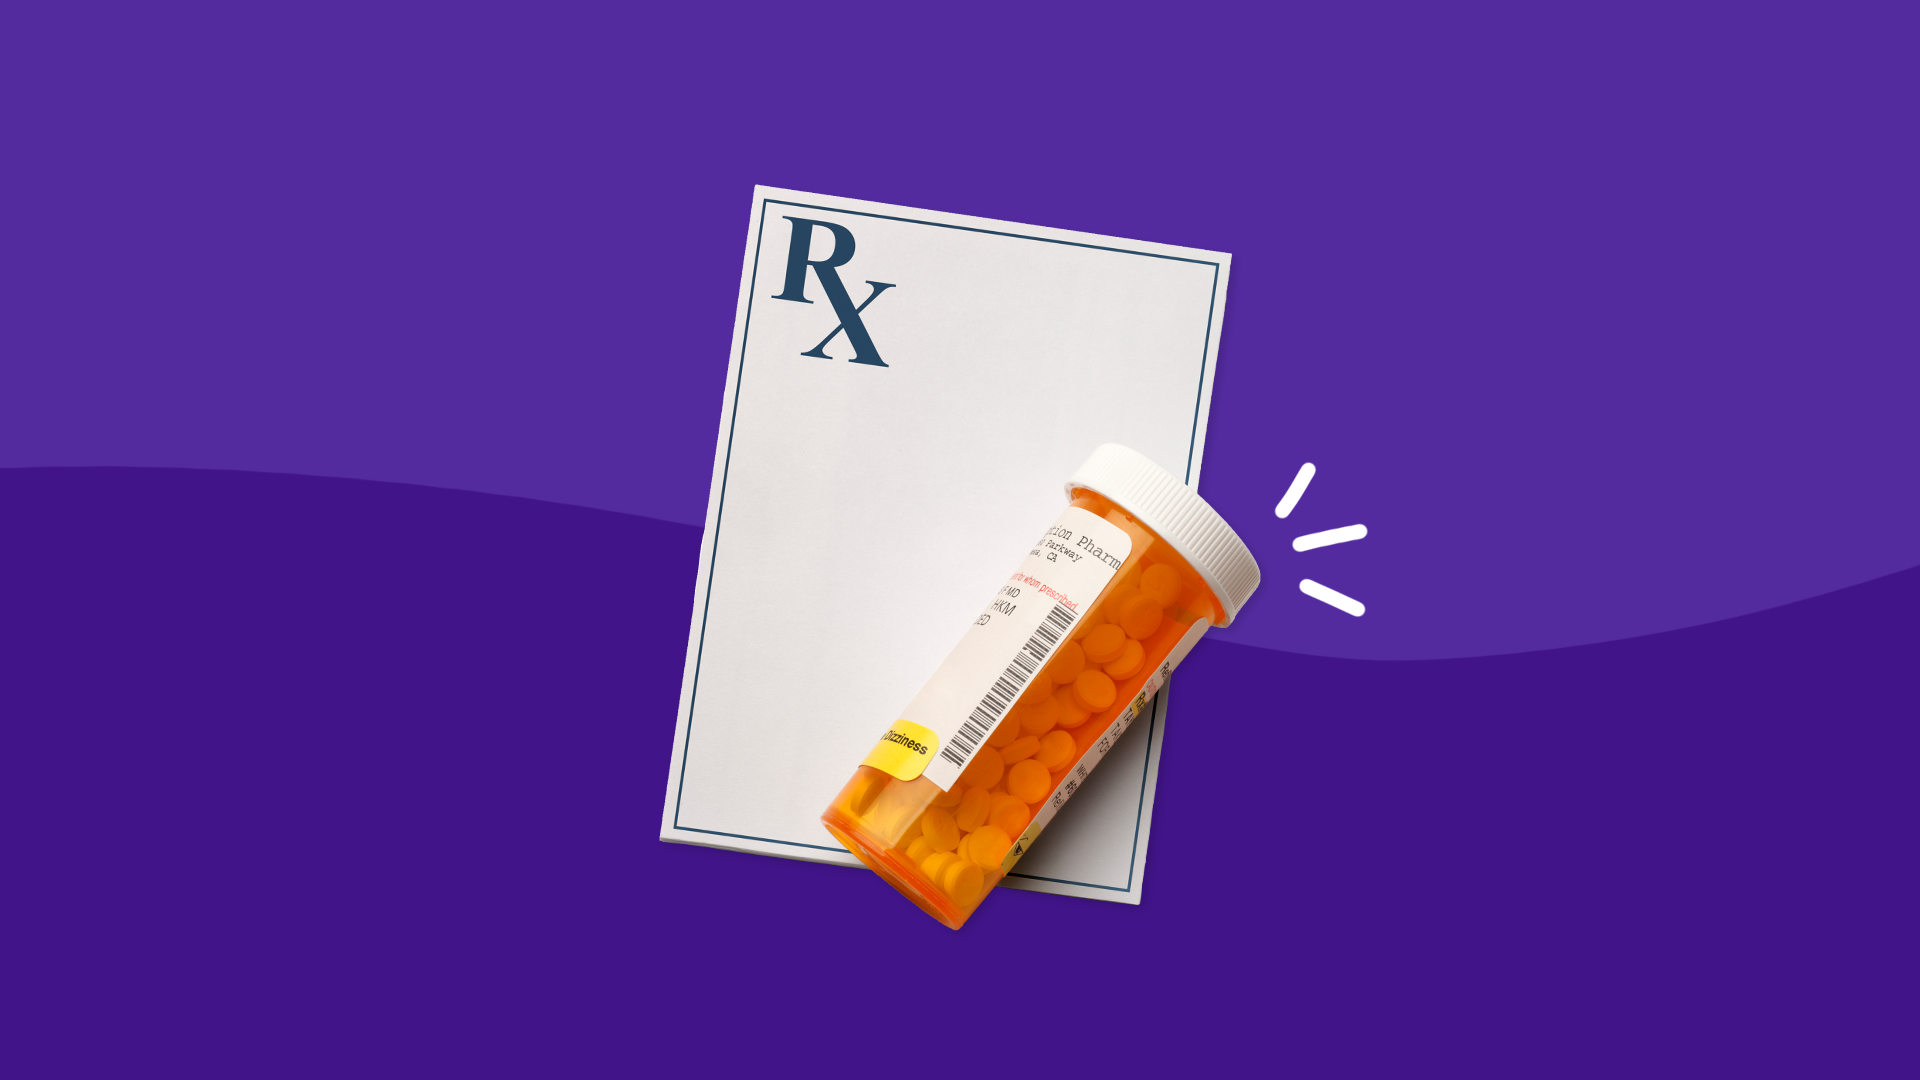 Prescription pad with pill bottle: What are the side effects of Janumet?